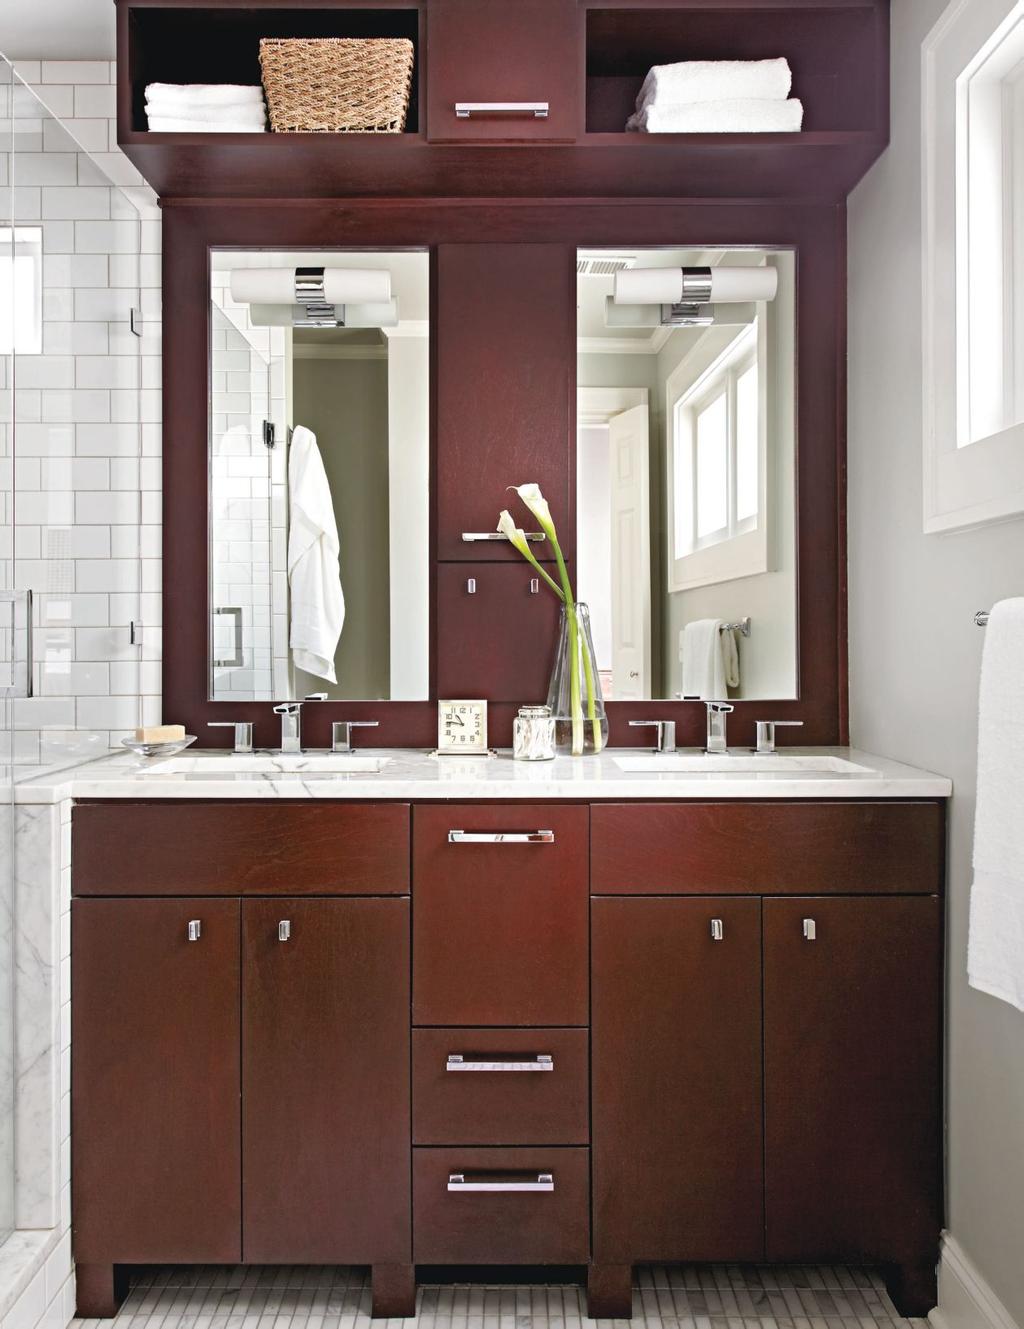 THIS PHOTO: The bathroom may be small, but that vanity is a workhorse, says architect Ili Nilsson, who designed the custom unit with two sinks, storage galore,